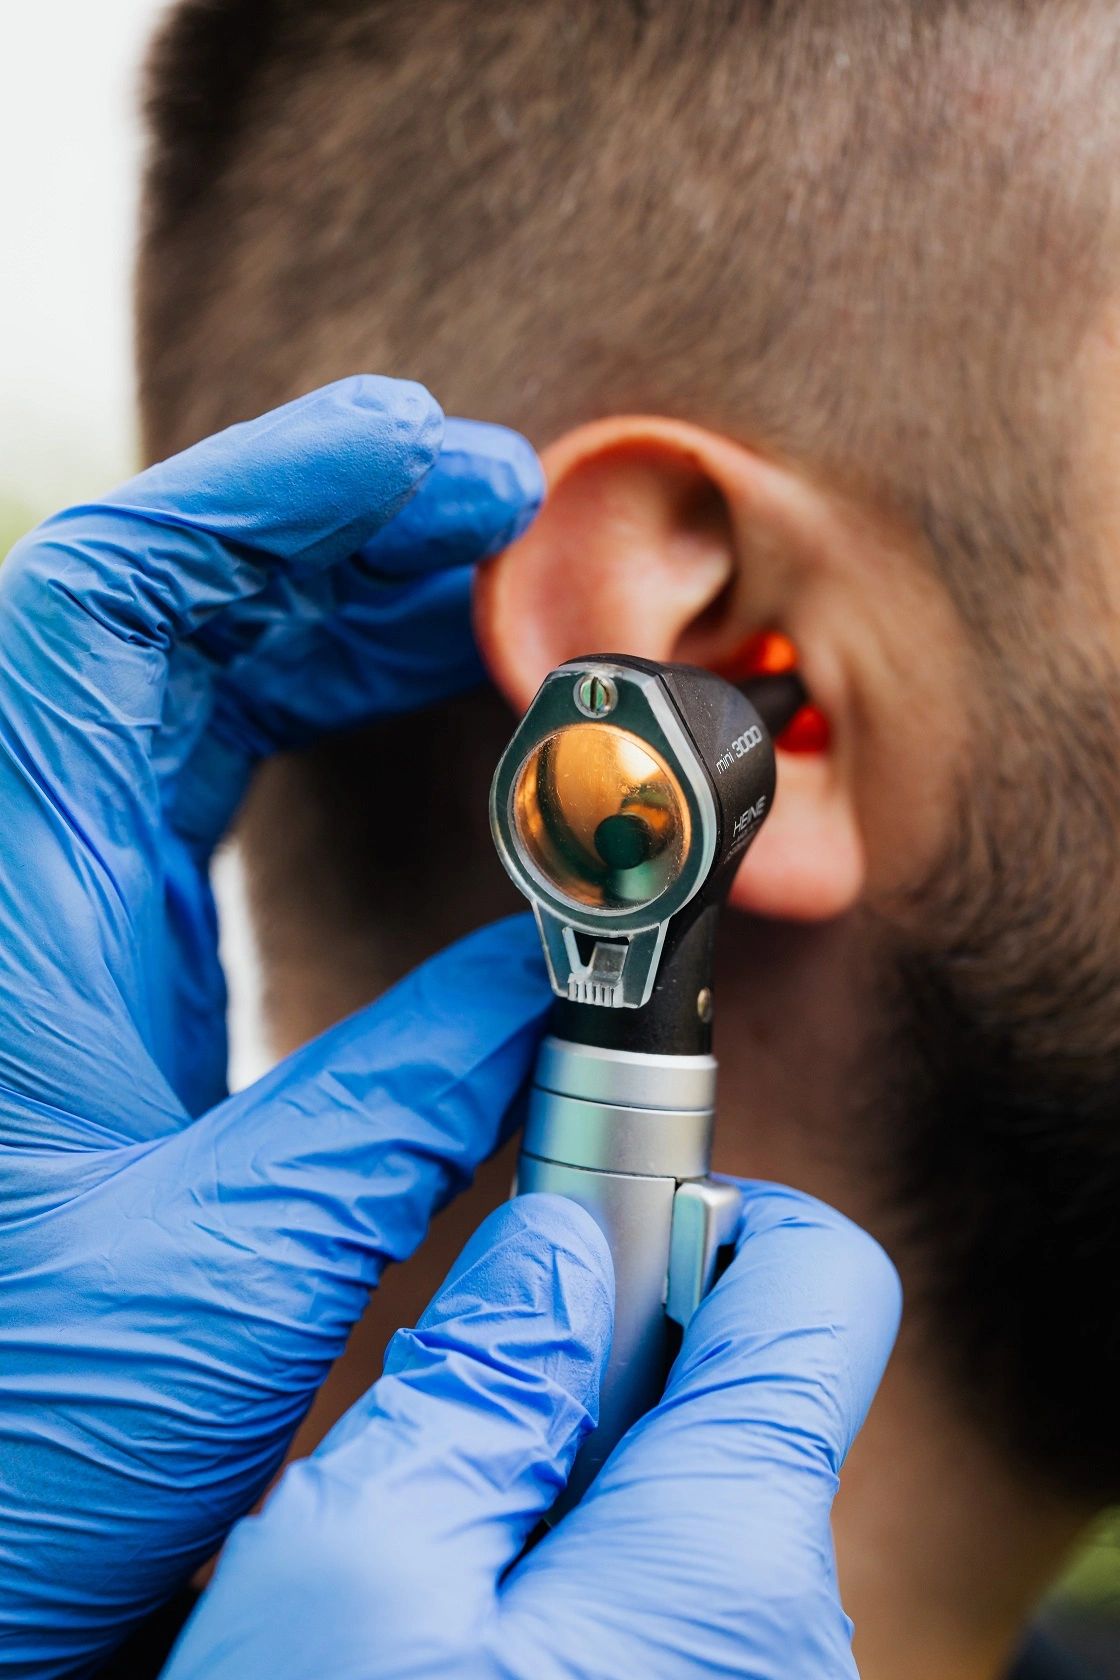 Microsuction & Irrigation Ear Wax Removal — Which orks Best?